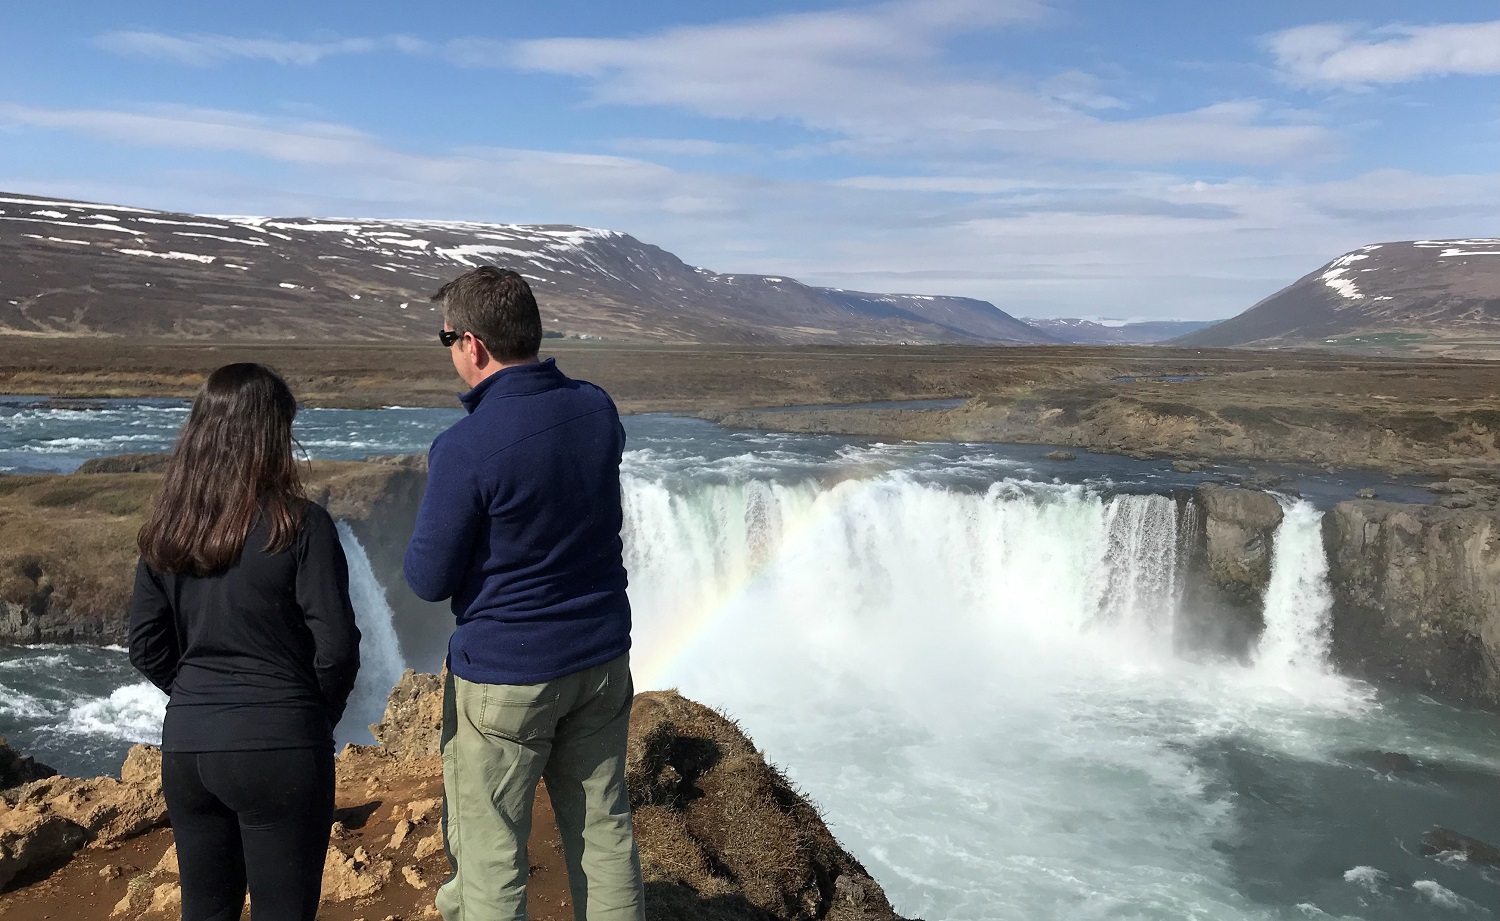 Bentley University Dean Rick Oches with student in Iceland